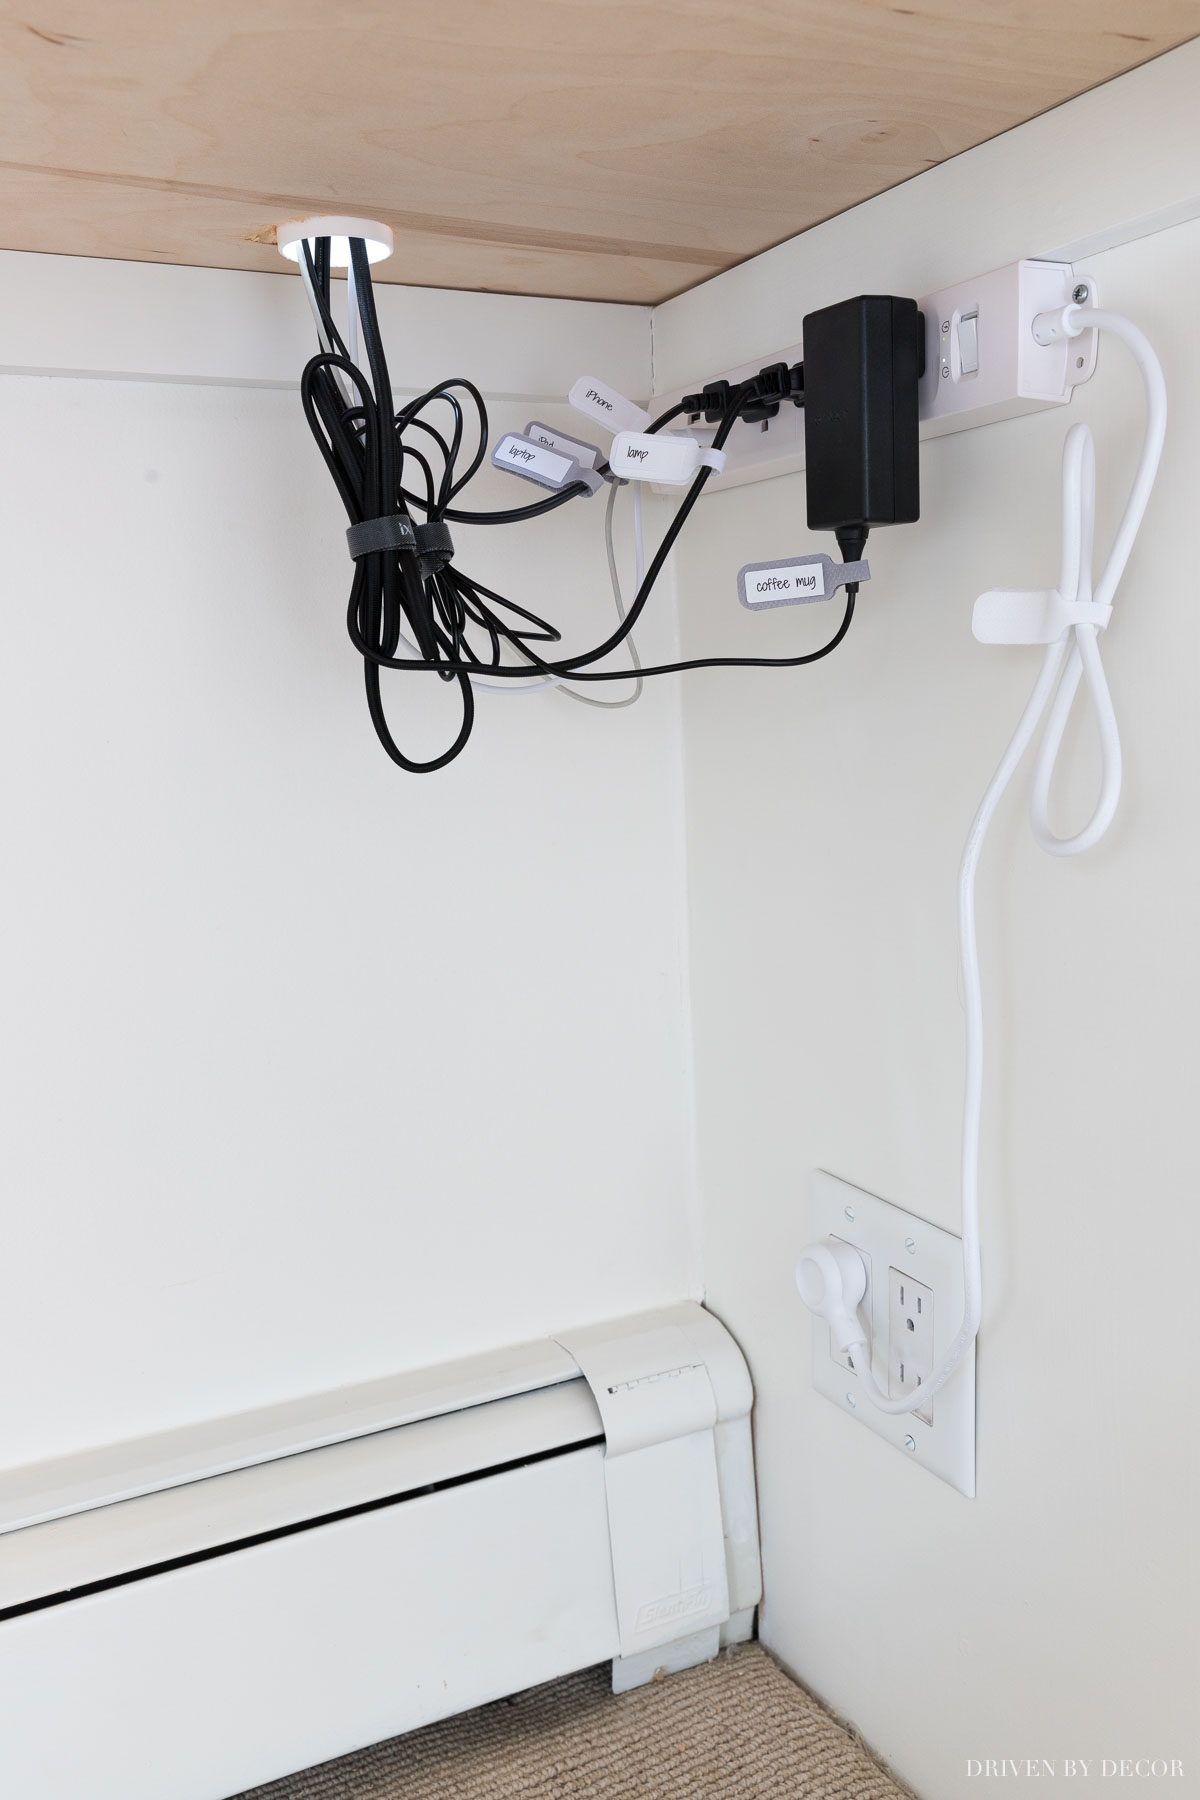 How we corral our cords under our desk - one of my favorite desk organization ideas!